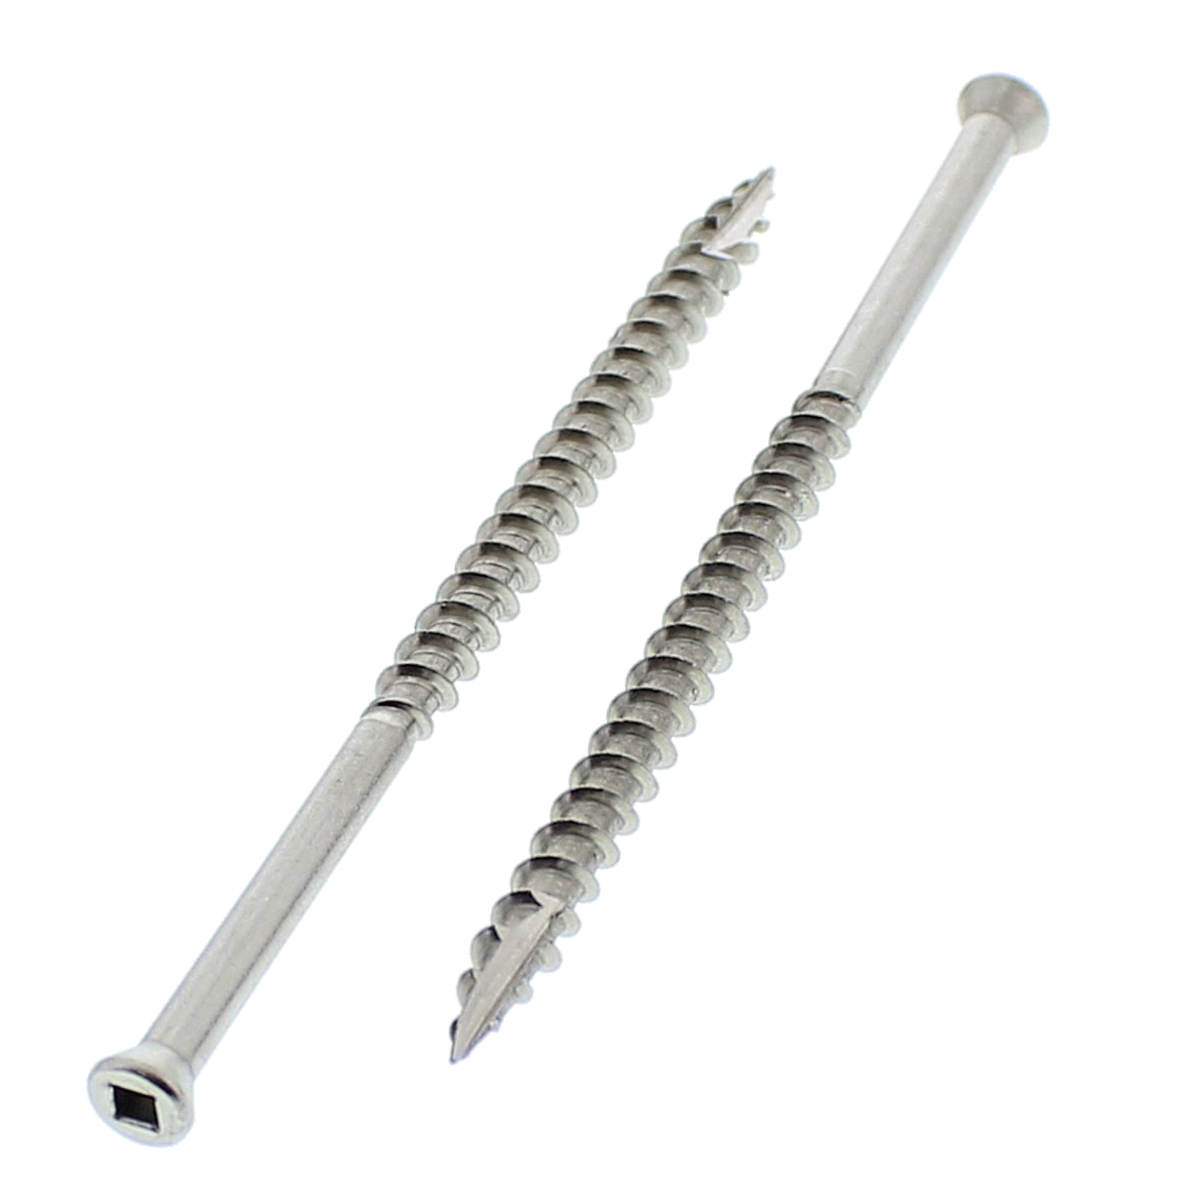 Tacoma Screw Products | #7 x 2-1/4" Trim Head Finishing Screws — 305 Stainless Steel, 100/PKG